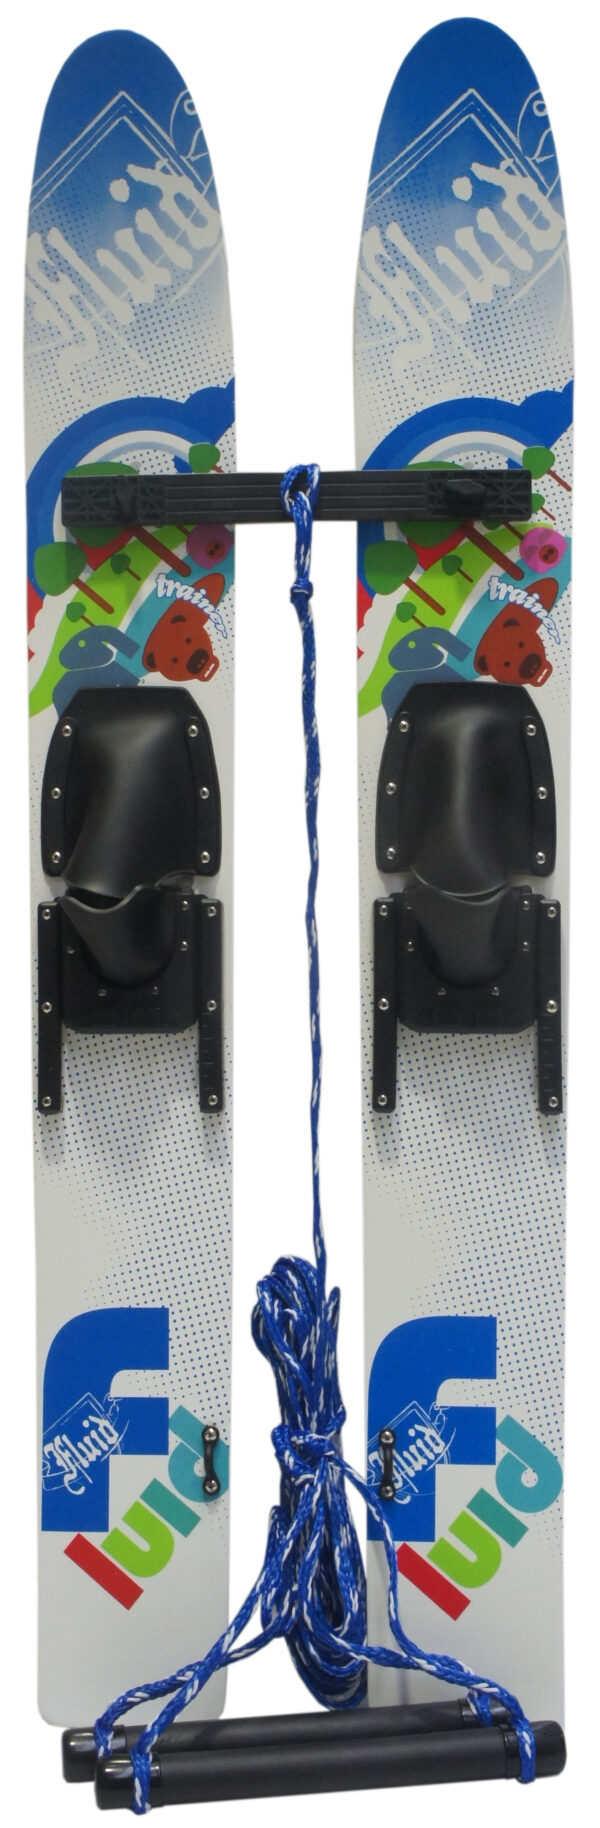 Fluid Kids Combo Trainer Skis with Rope and Bar